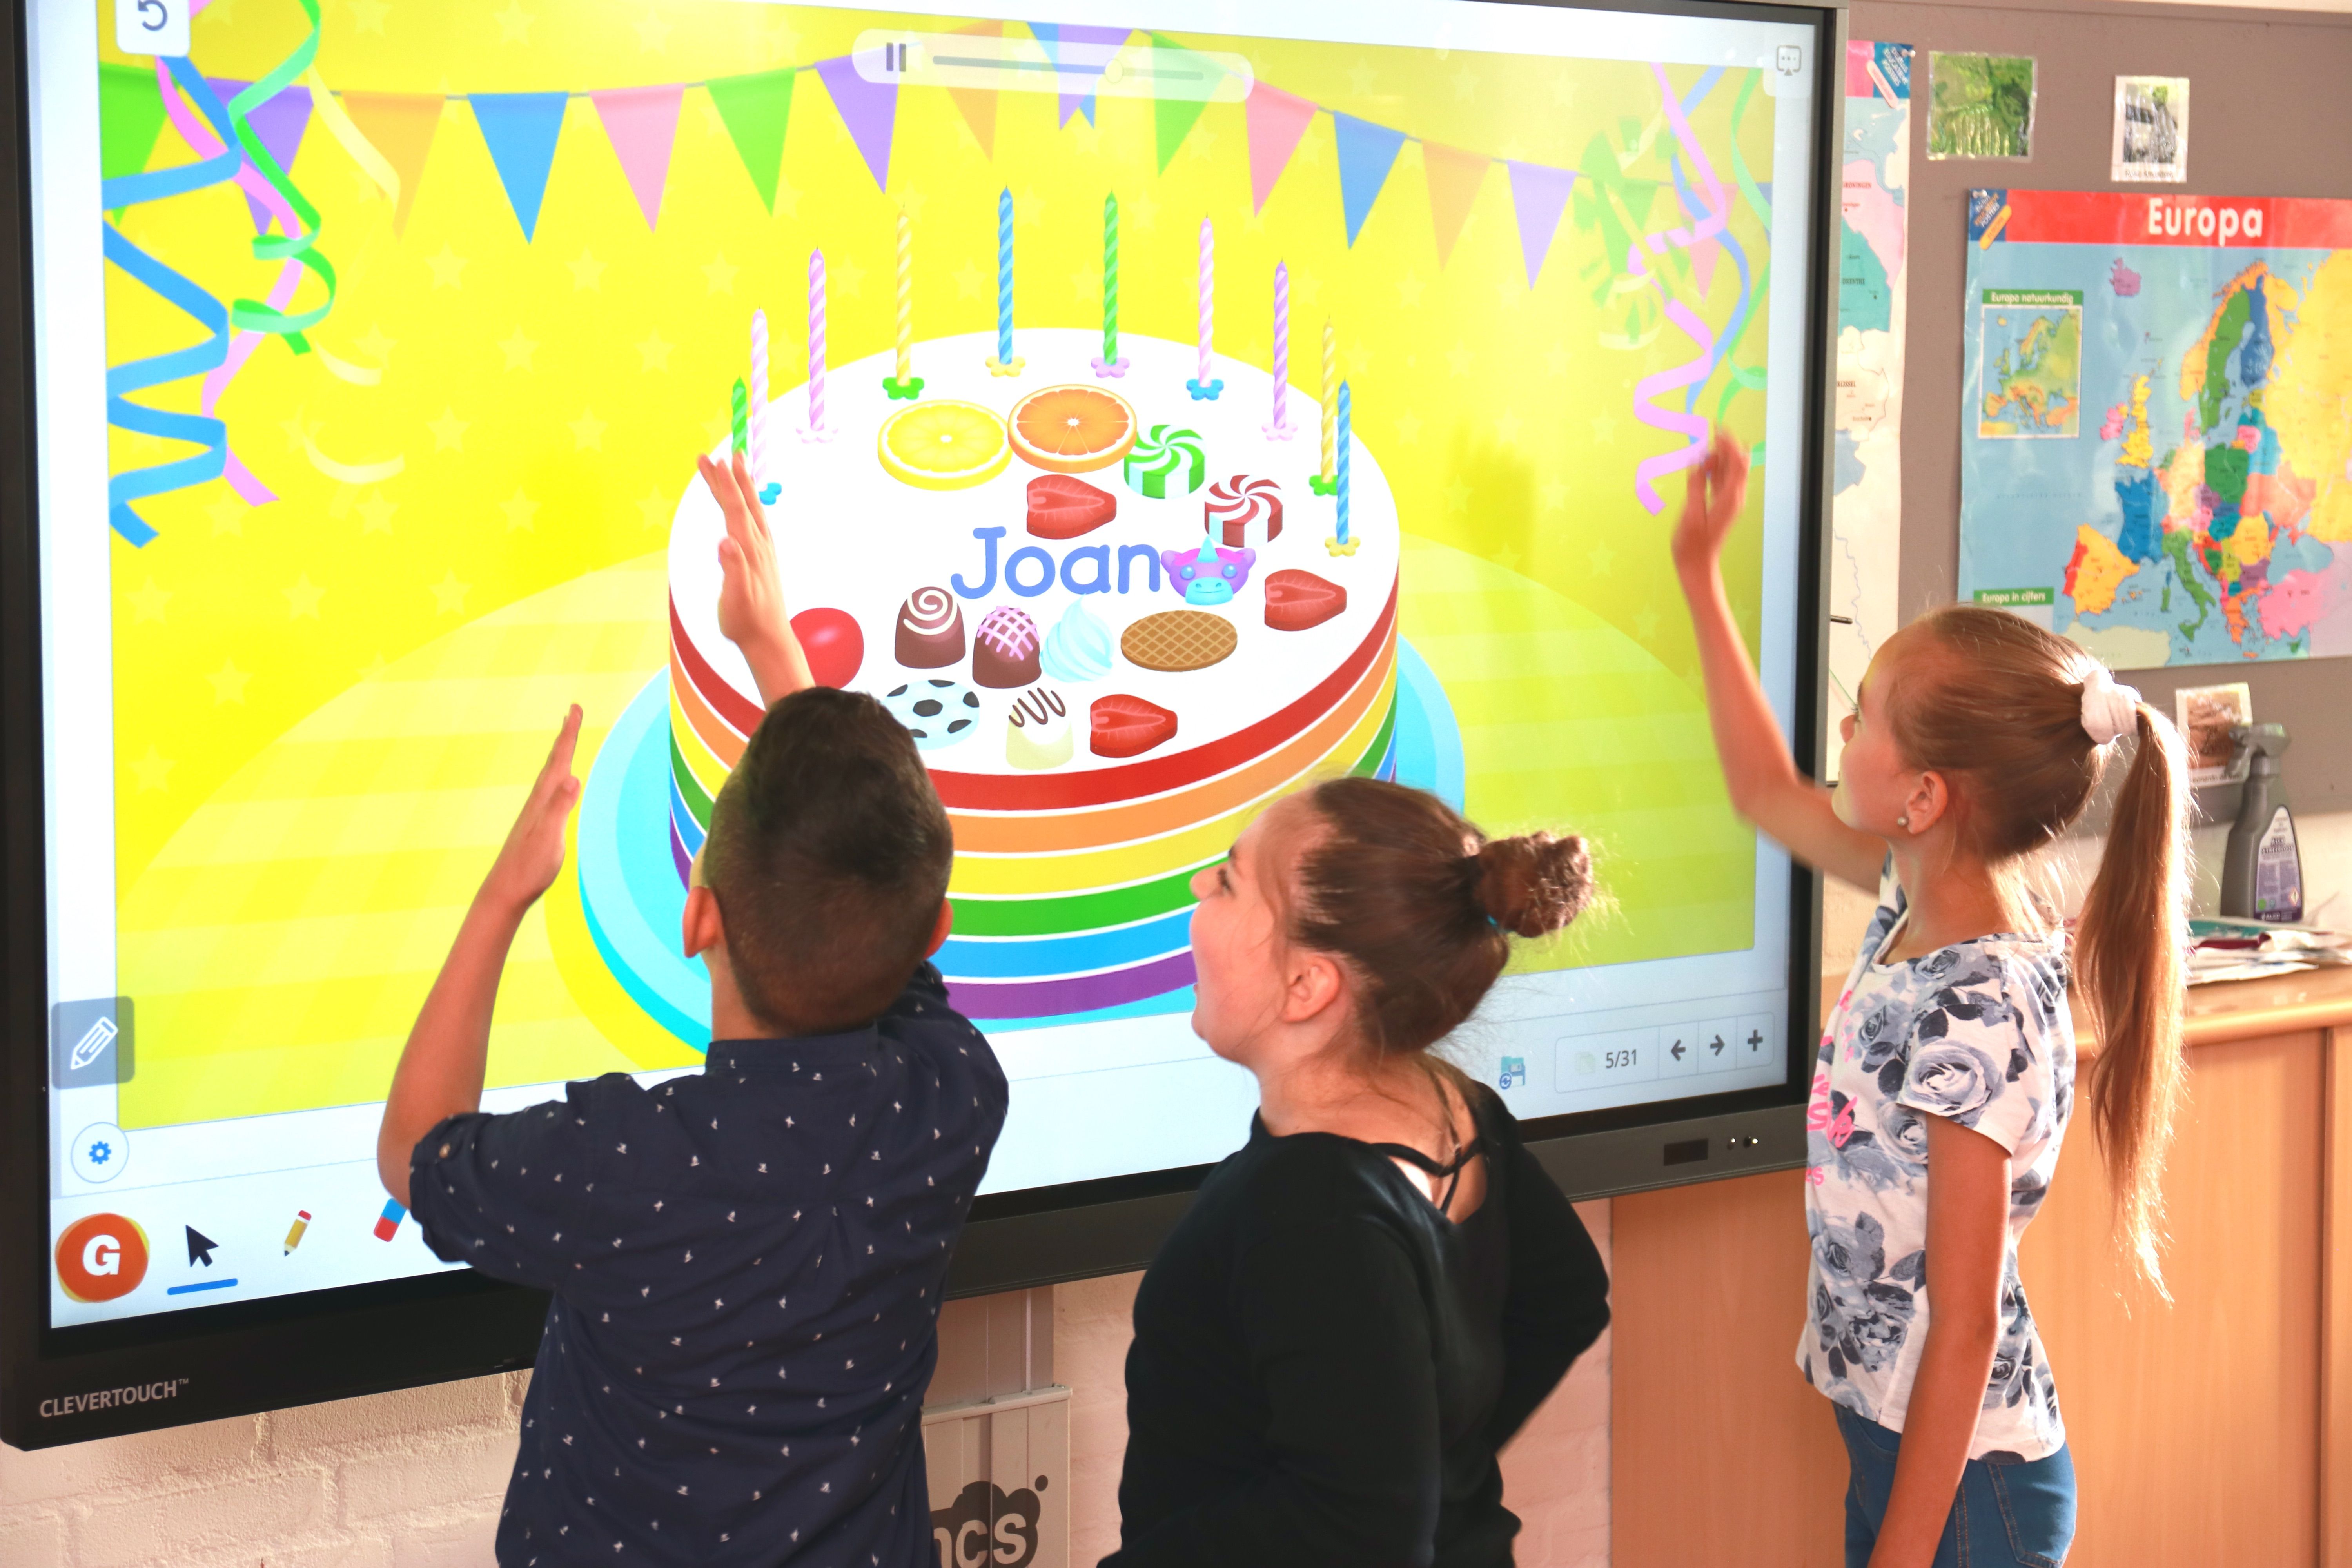 Students using a birthday cake tool on a classroom smart board